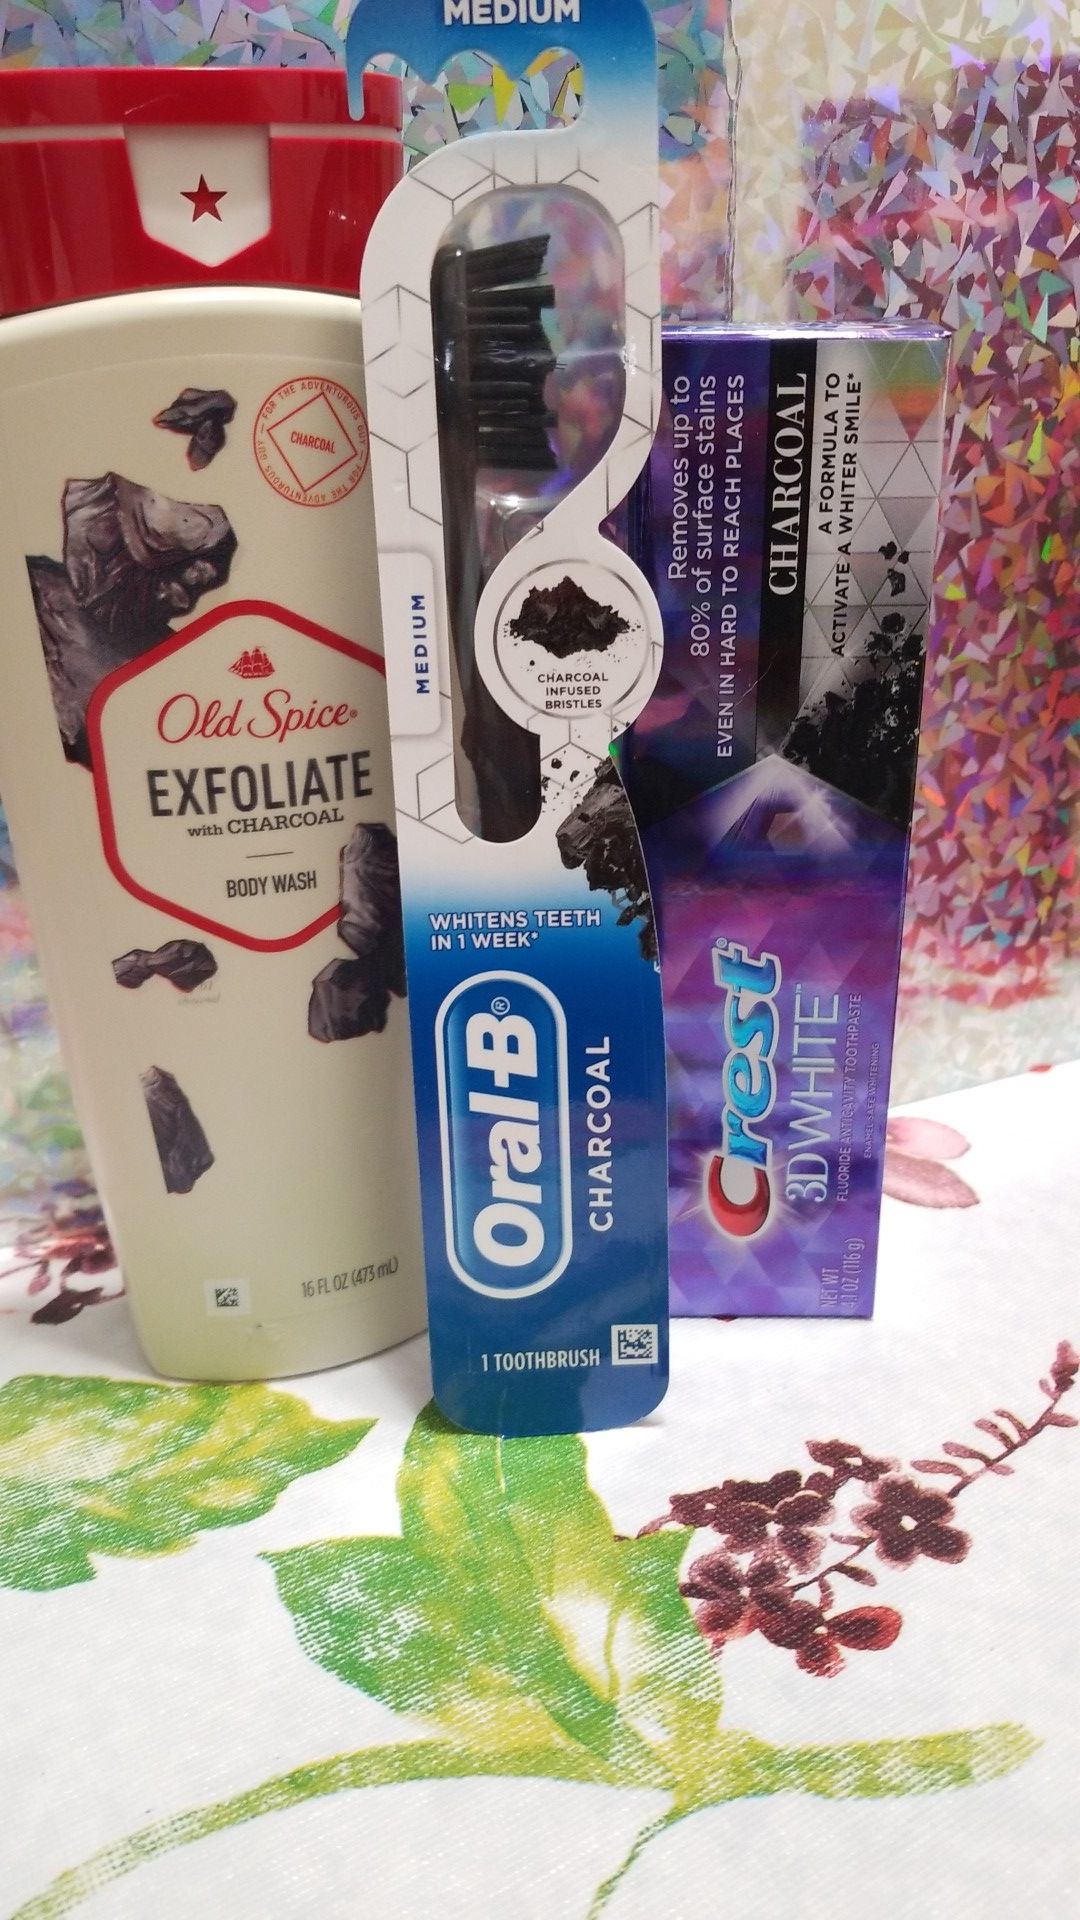 Old spice and crest charcoal bundle